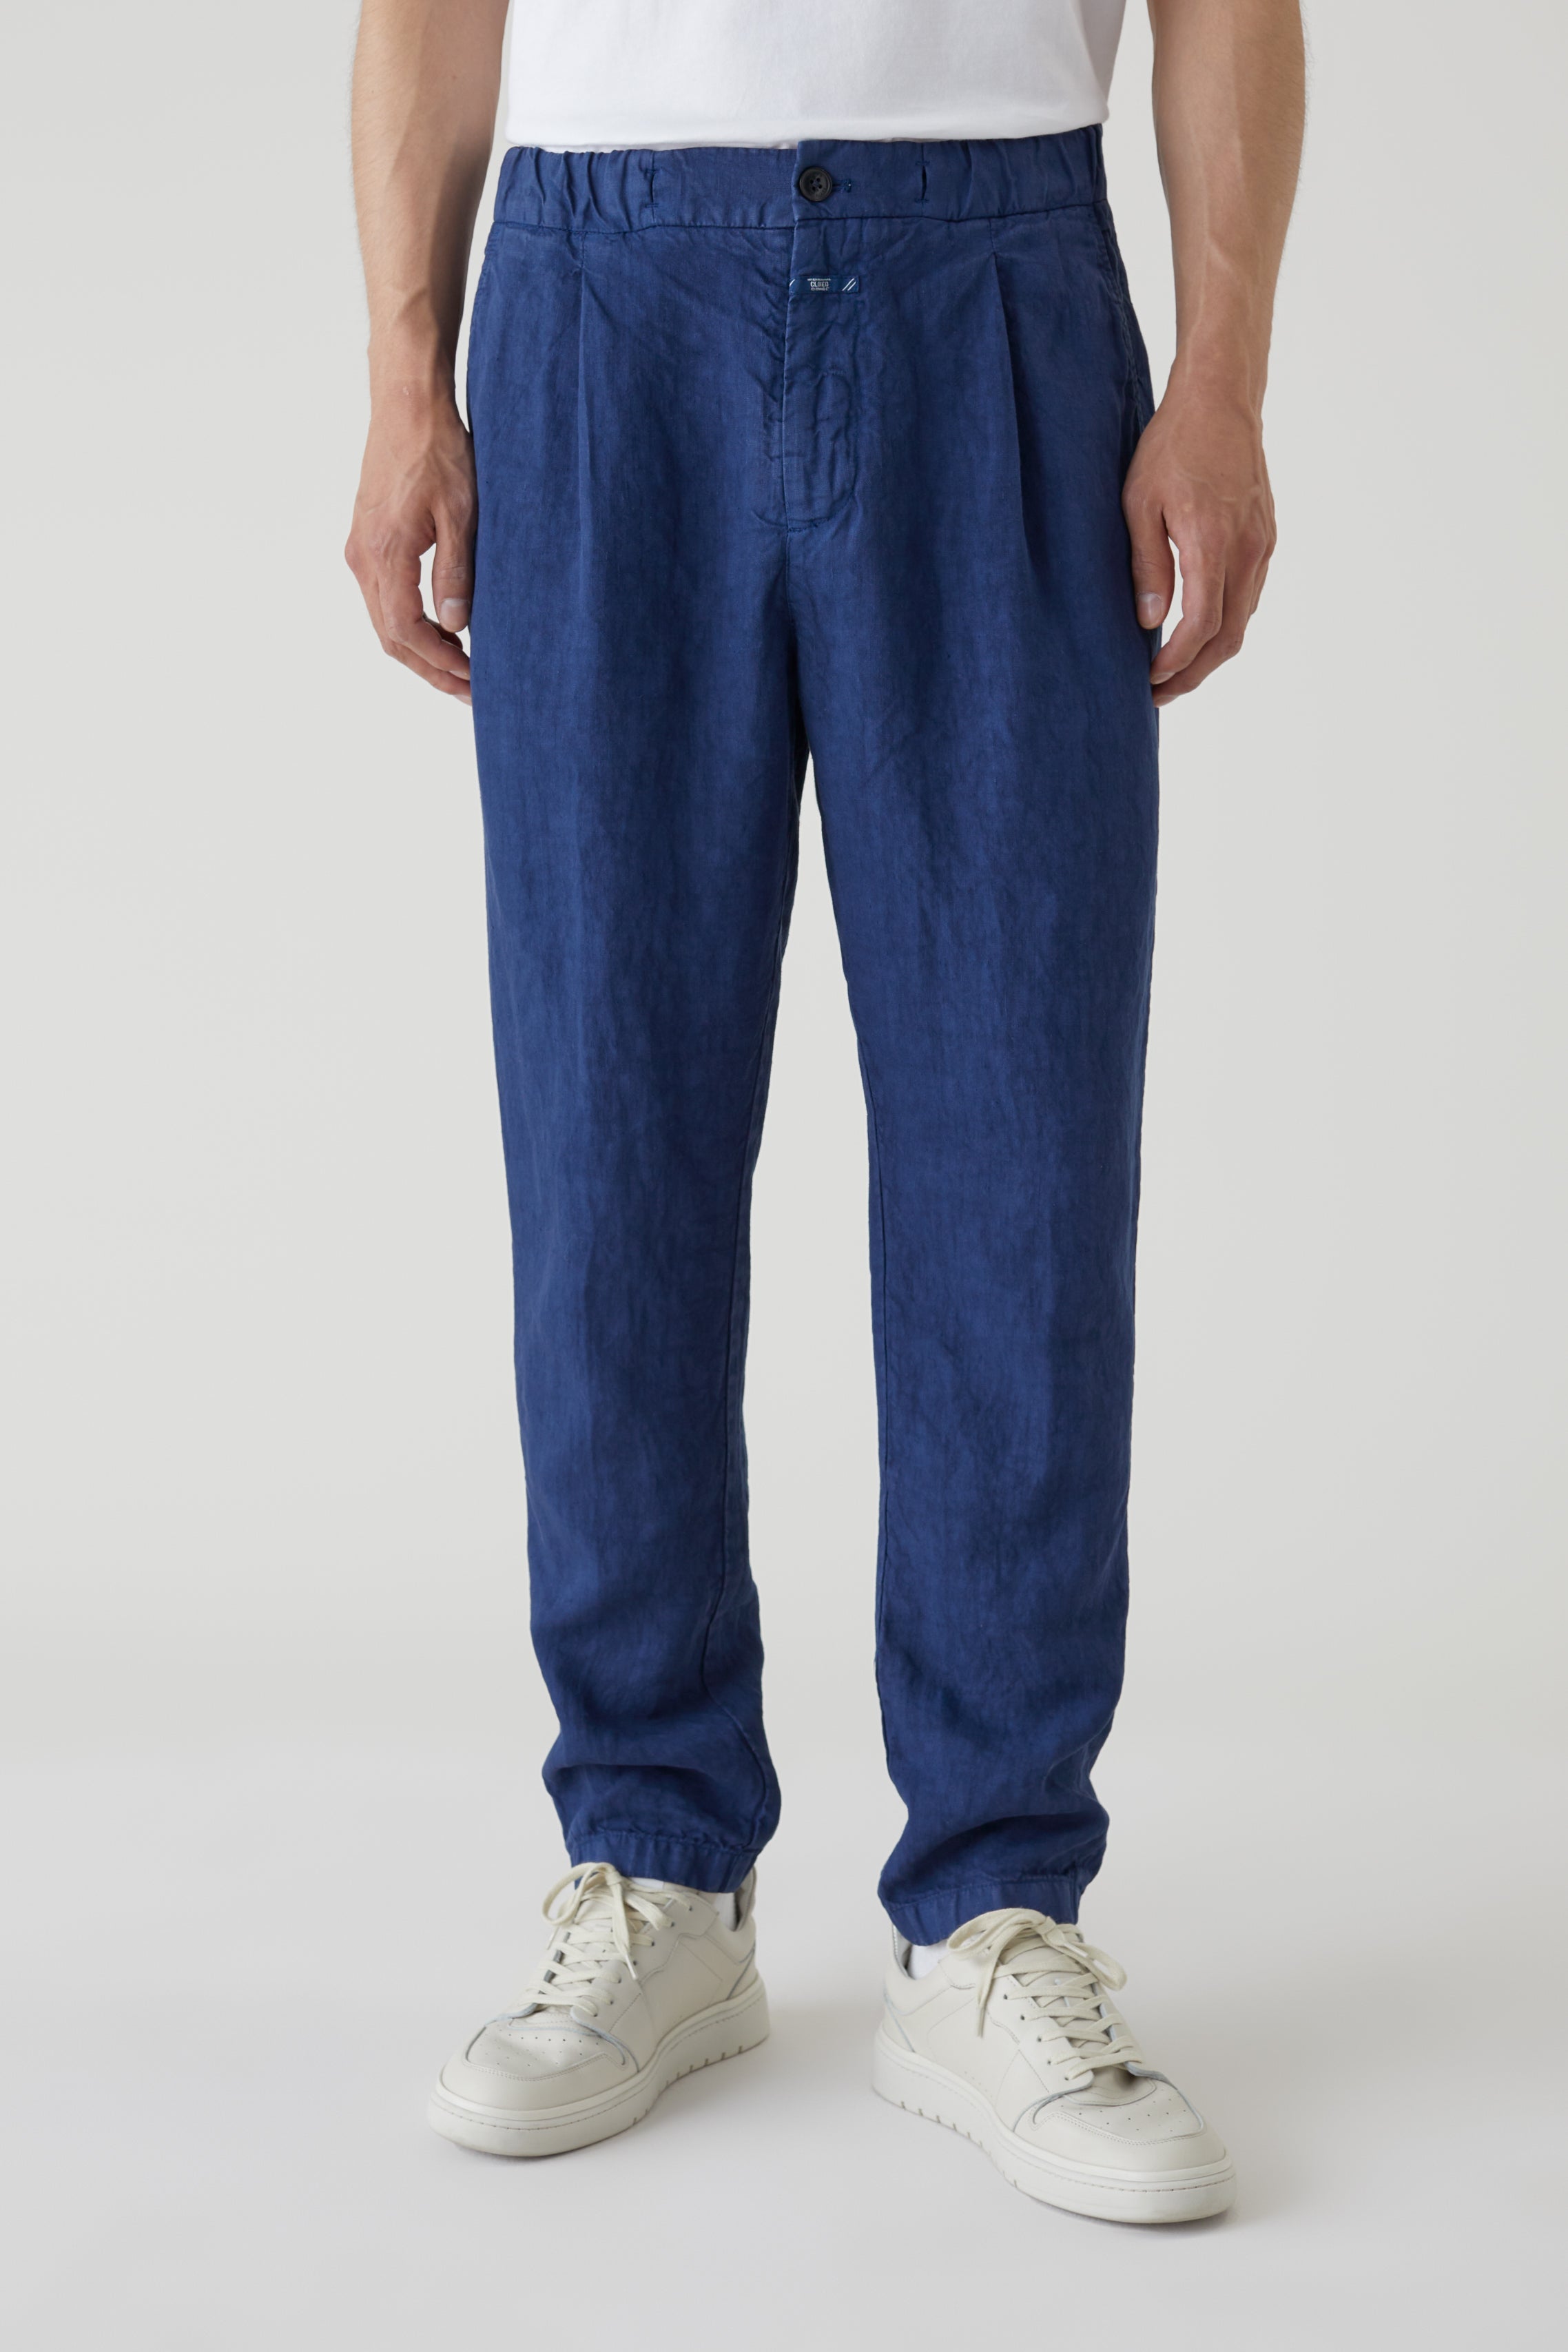 CLOSED-OUTLET-SALE-STYLE-NAME-VIGO-TAPERED-PANTS-Hosen-ARCHIVE-COLLECTION-2.jpg